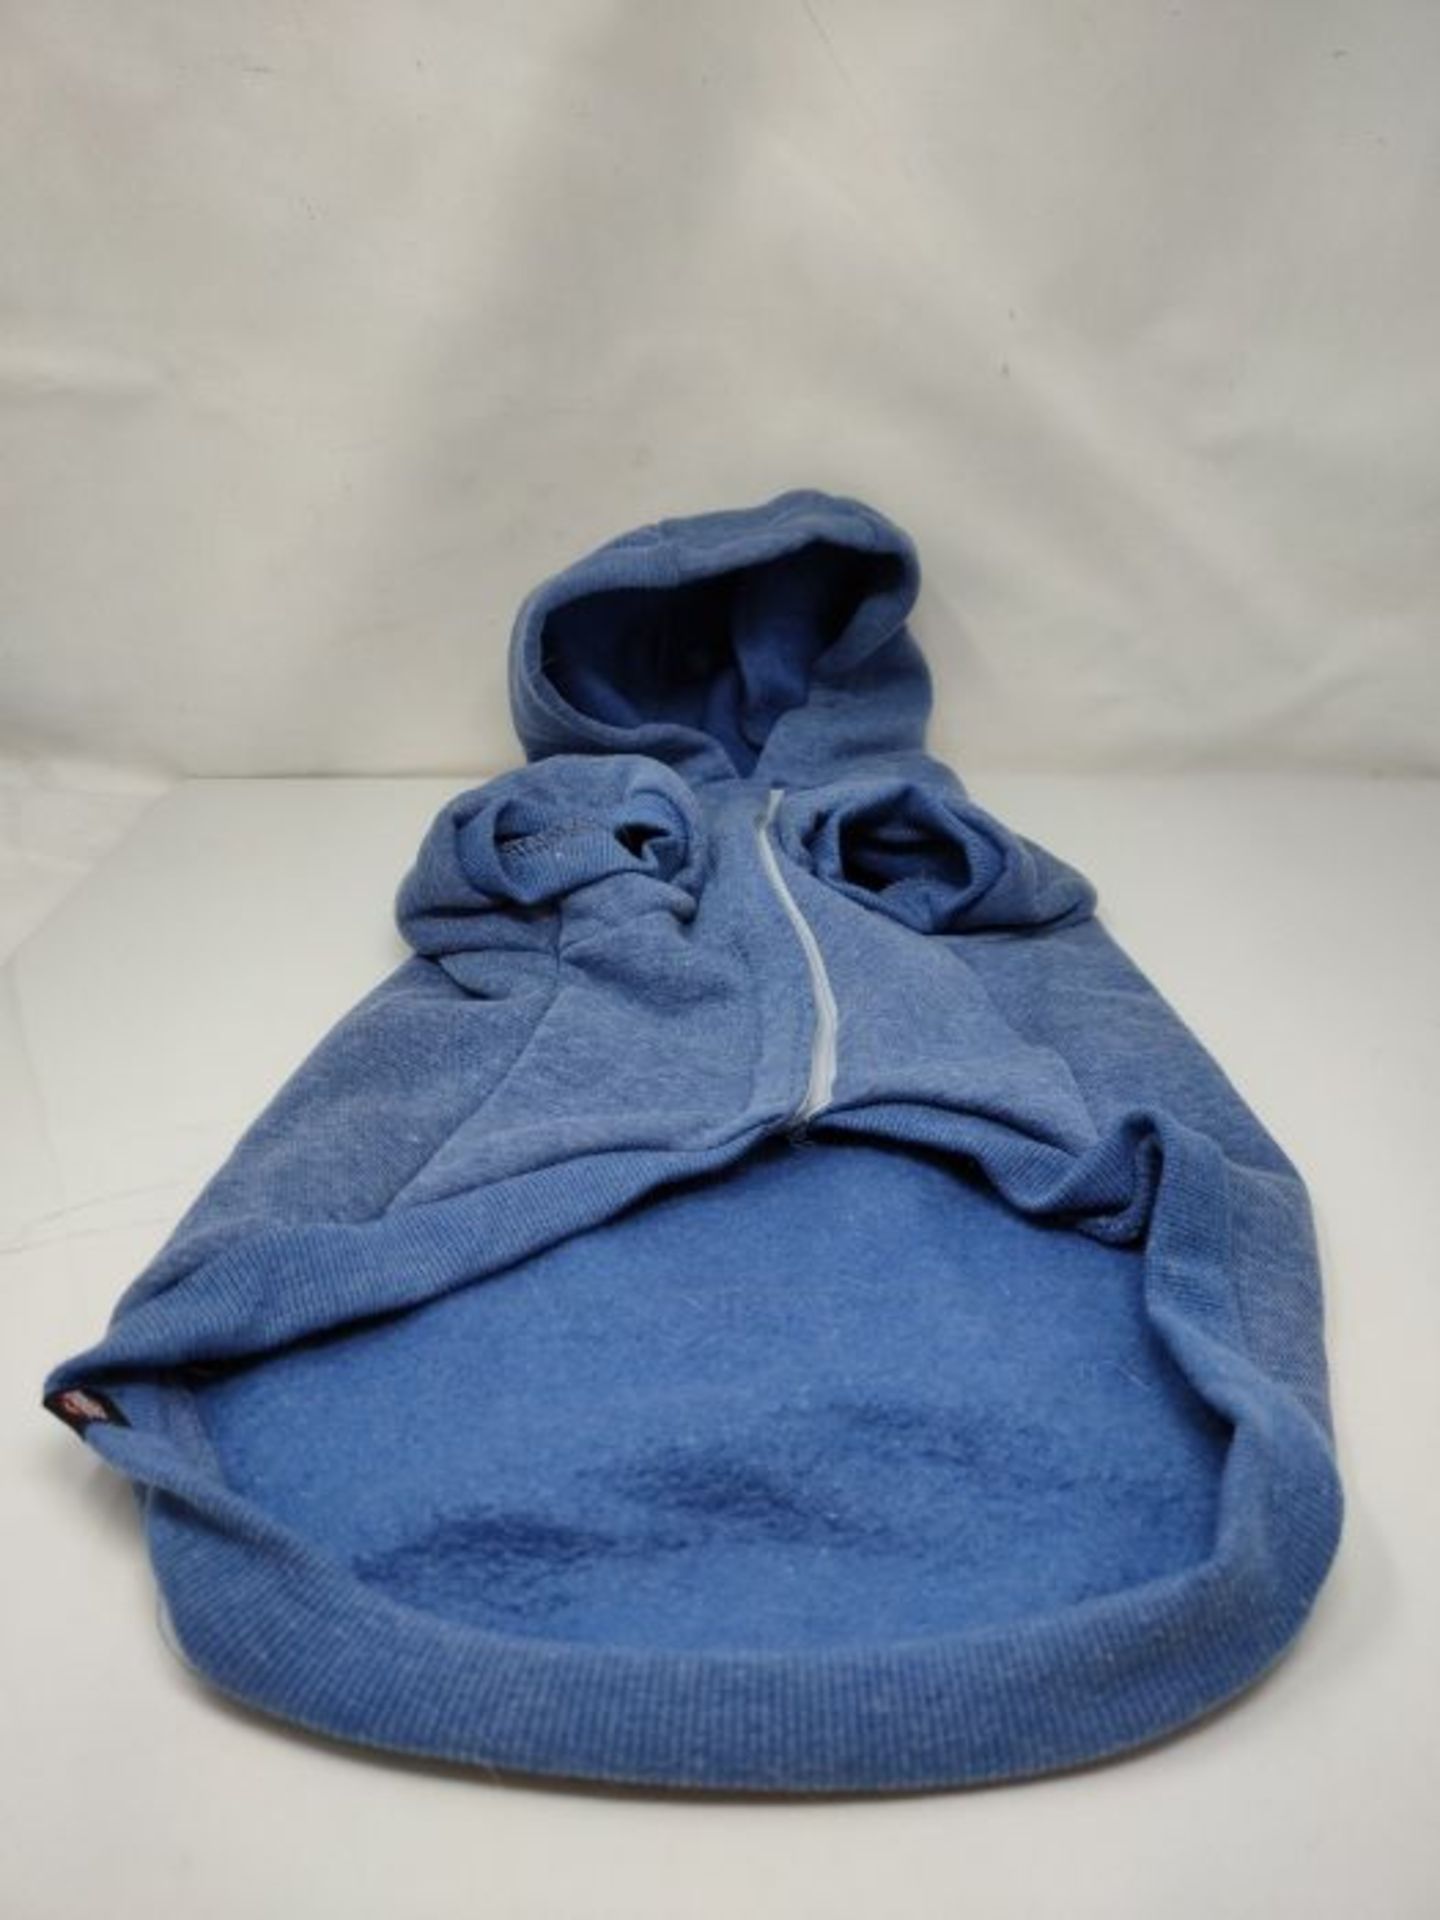 TRIXIE Be Nordic Hoodie, M: 45 cm: 60 cm, Blue, Dog - Image 2 of 2